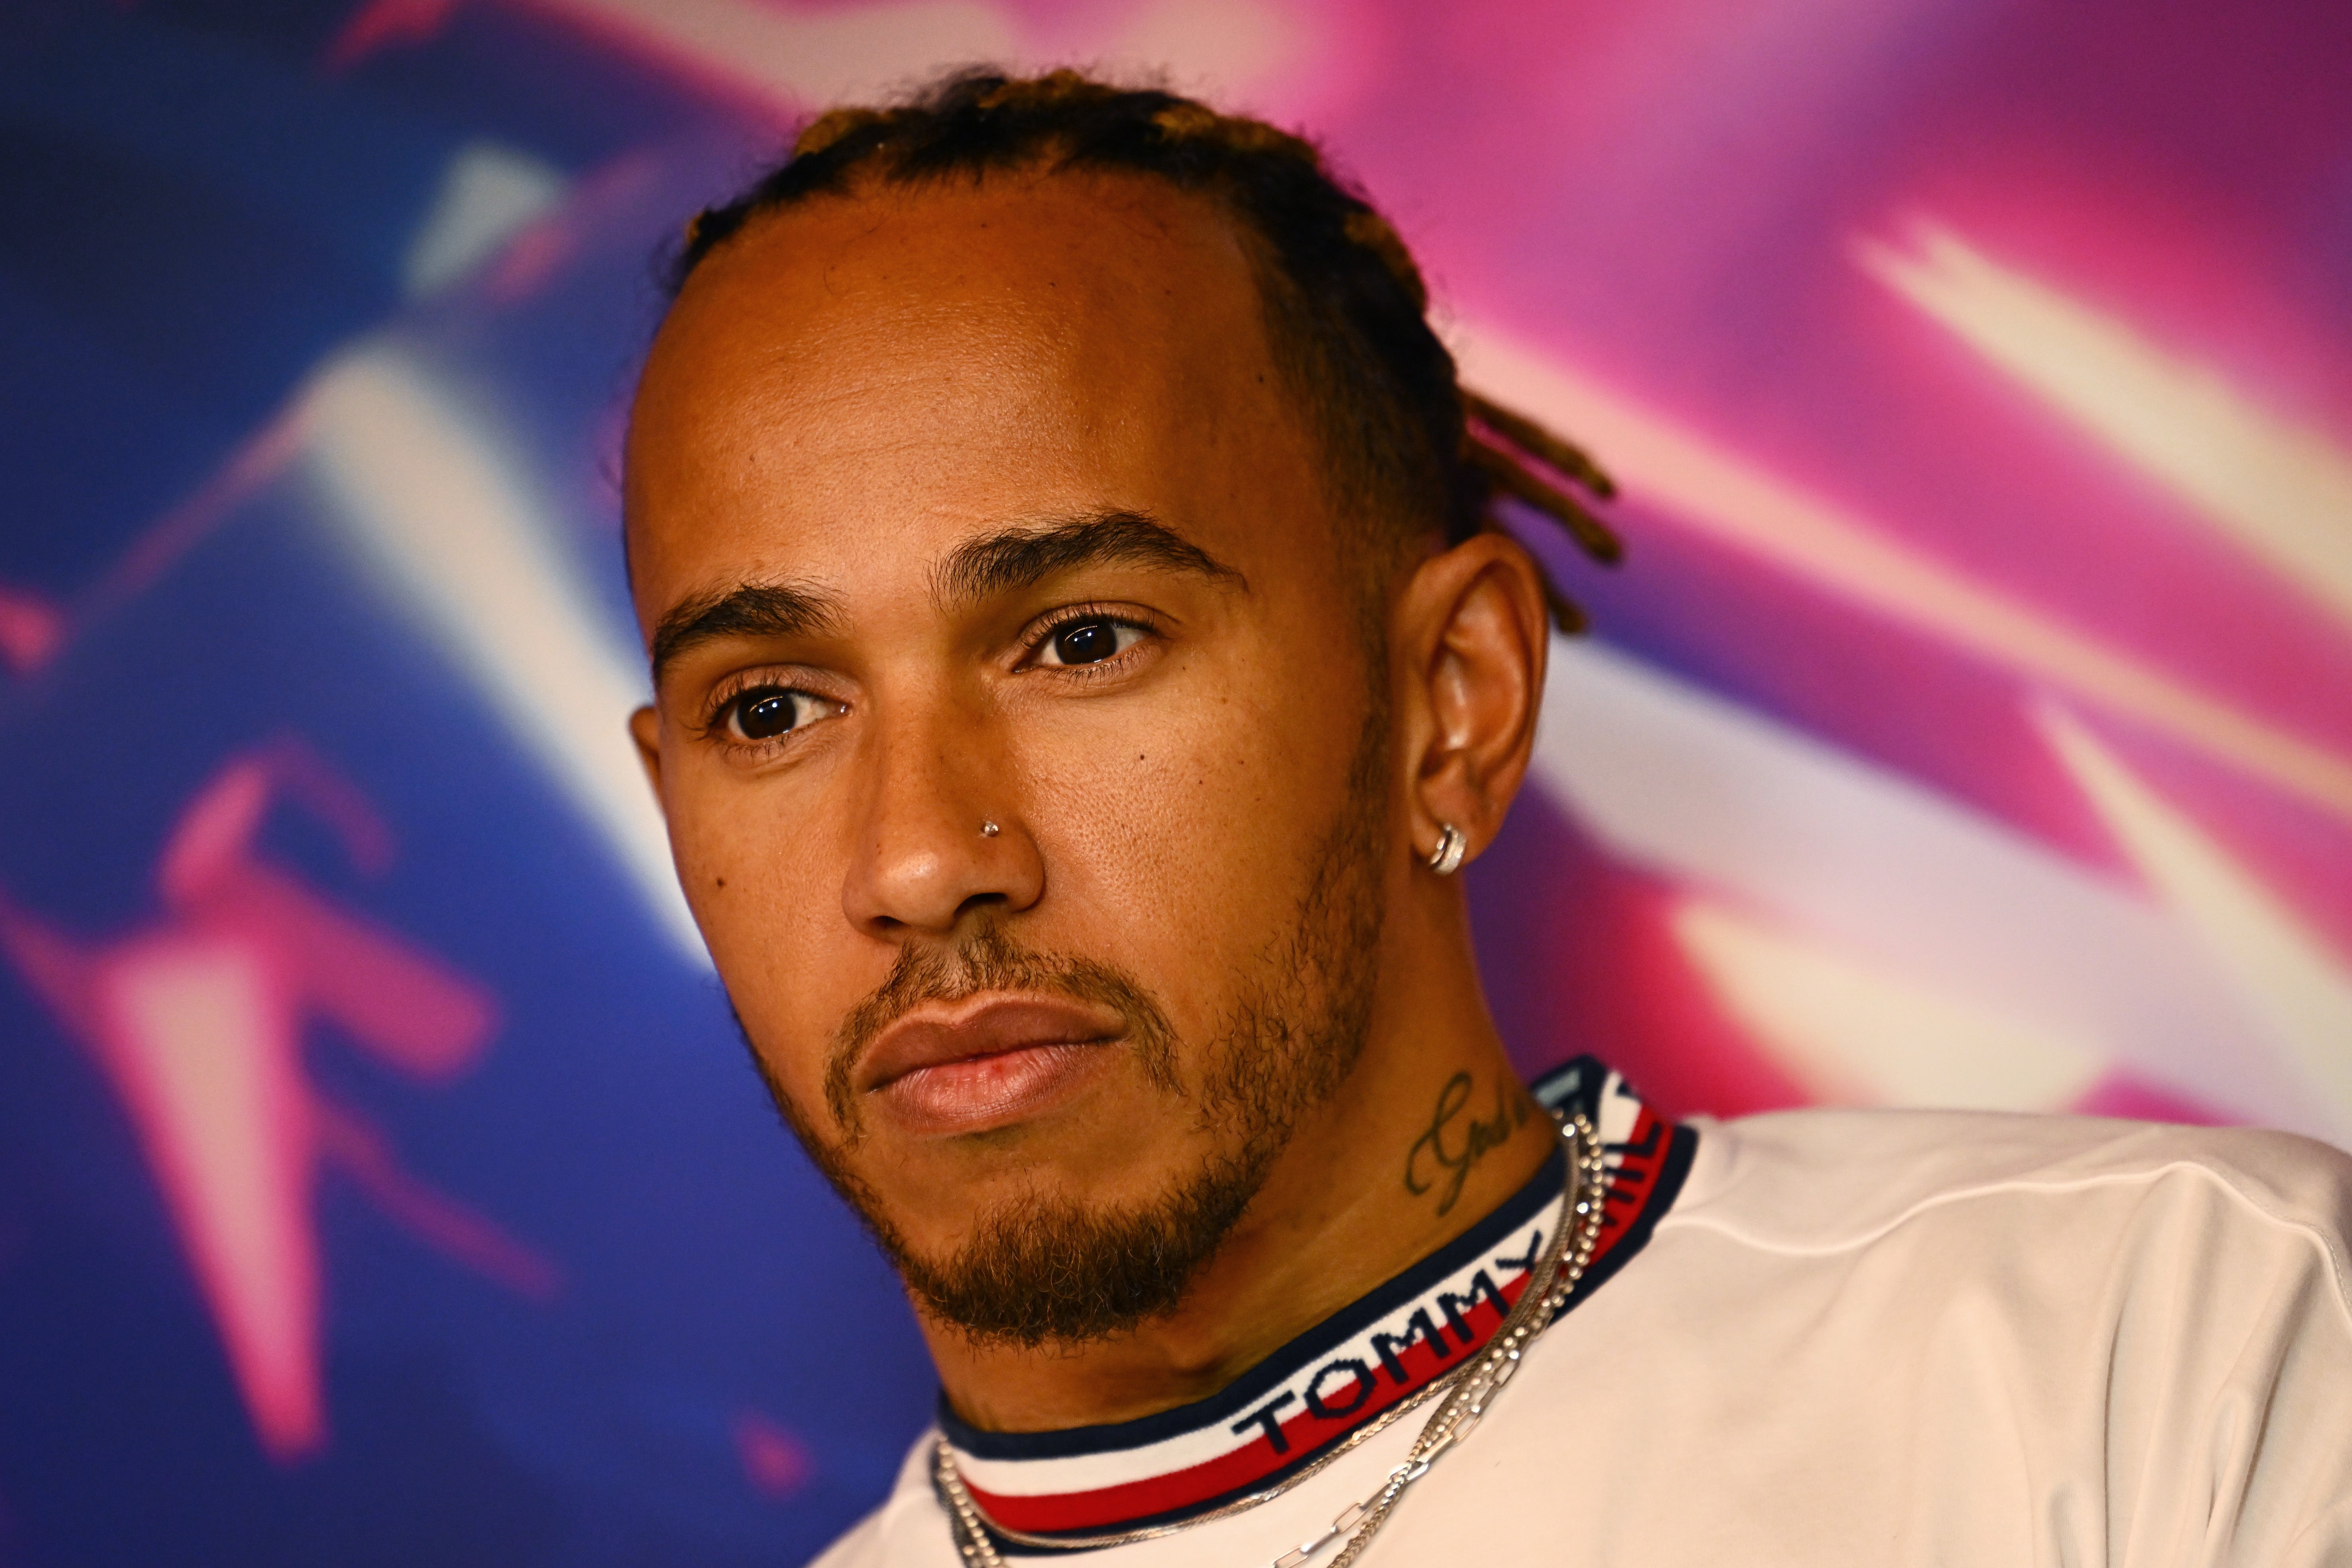 Lewis Hamilton has been unable to challenge for race victories so far this season.